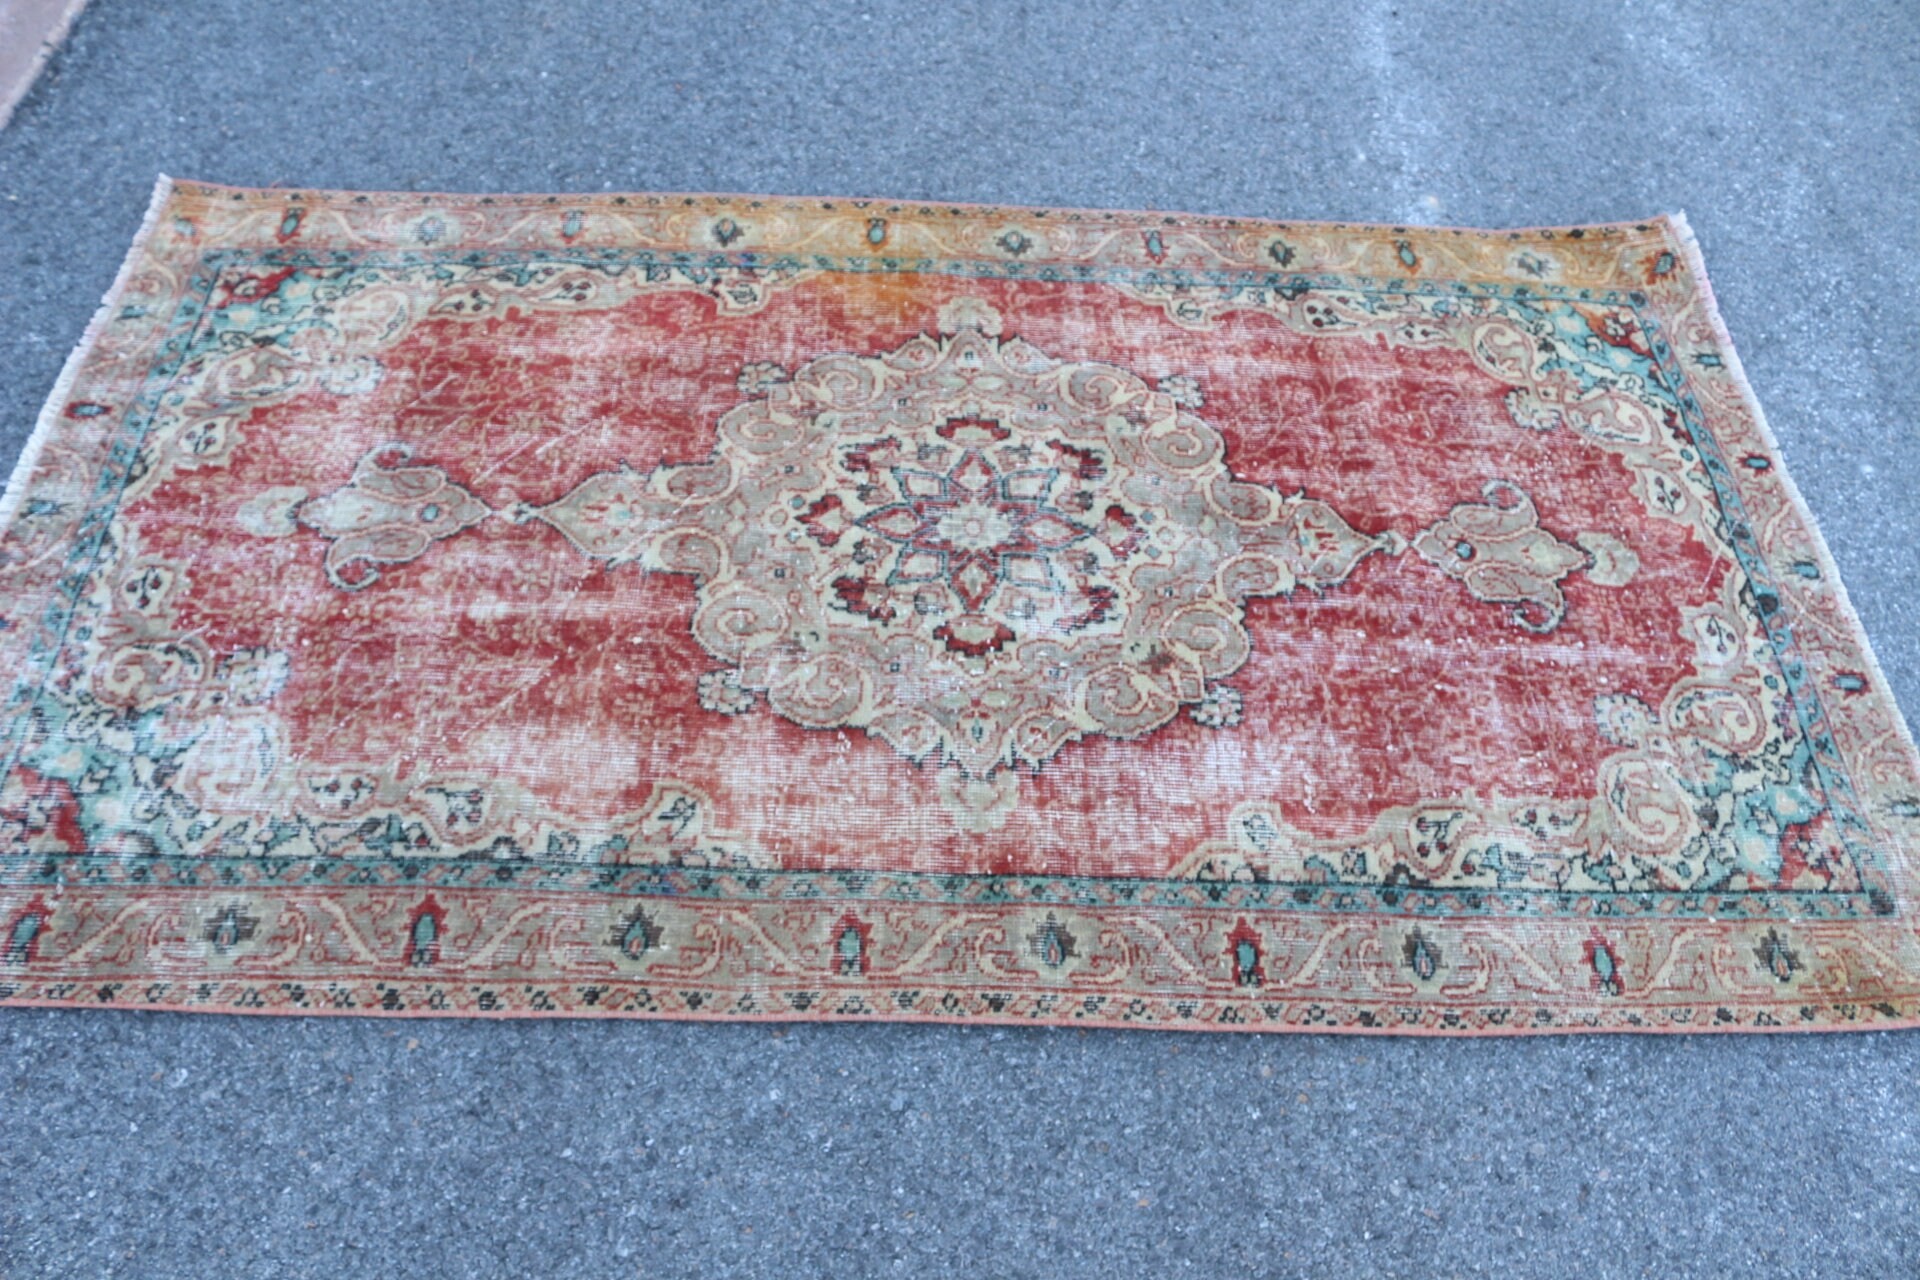 Vintage Rug, Indoor Rug, Antique Rug, Rugs for Area, Bright Rug, Anatolian Rugs, Red Bedroom Rug, Turkish Rugs, 3.8x6.7 ft Area Rug